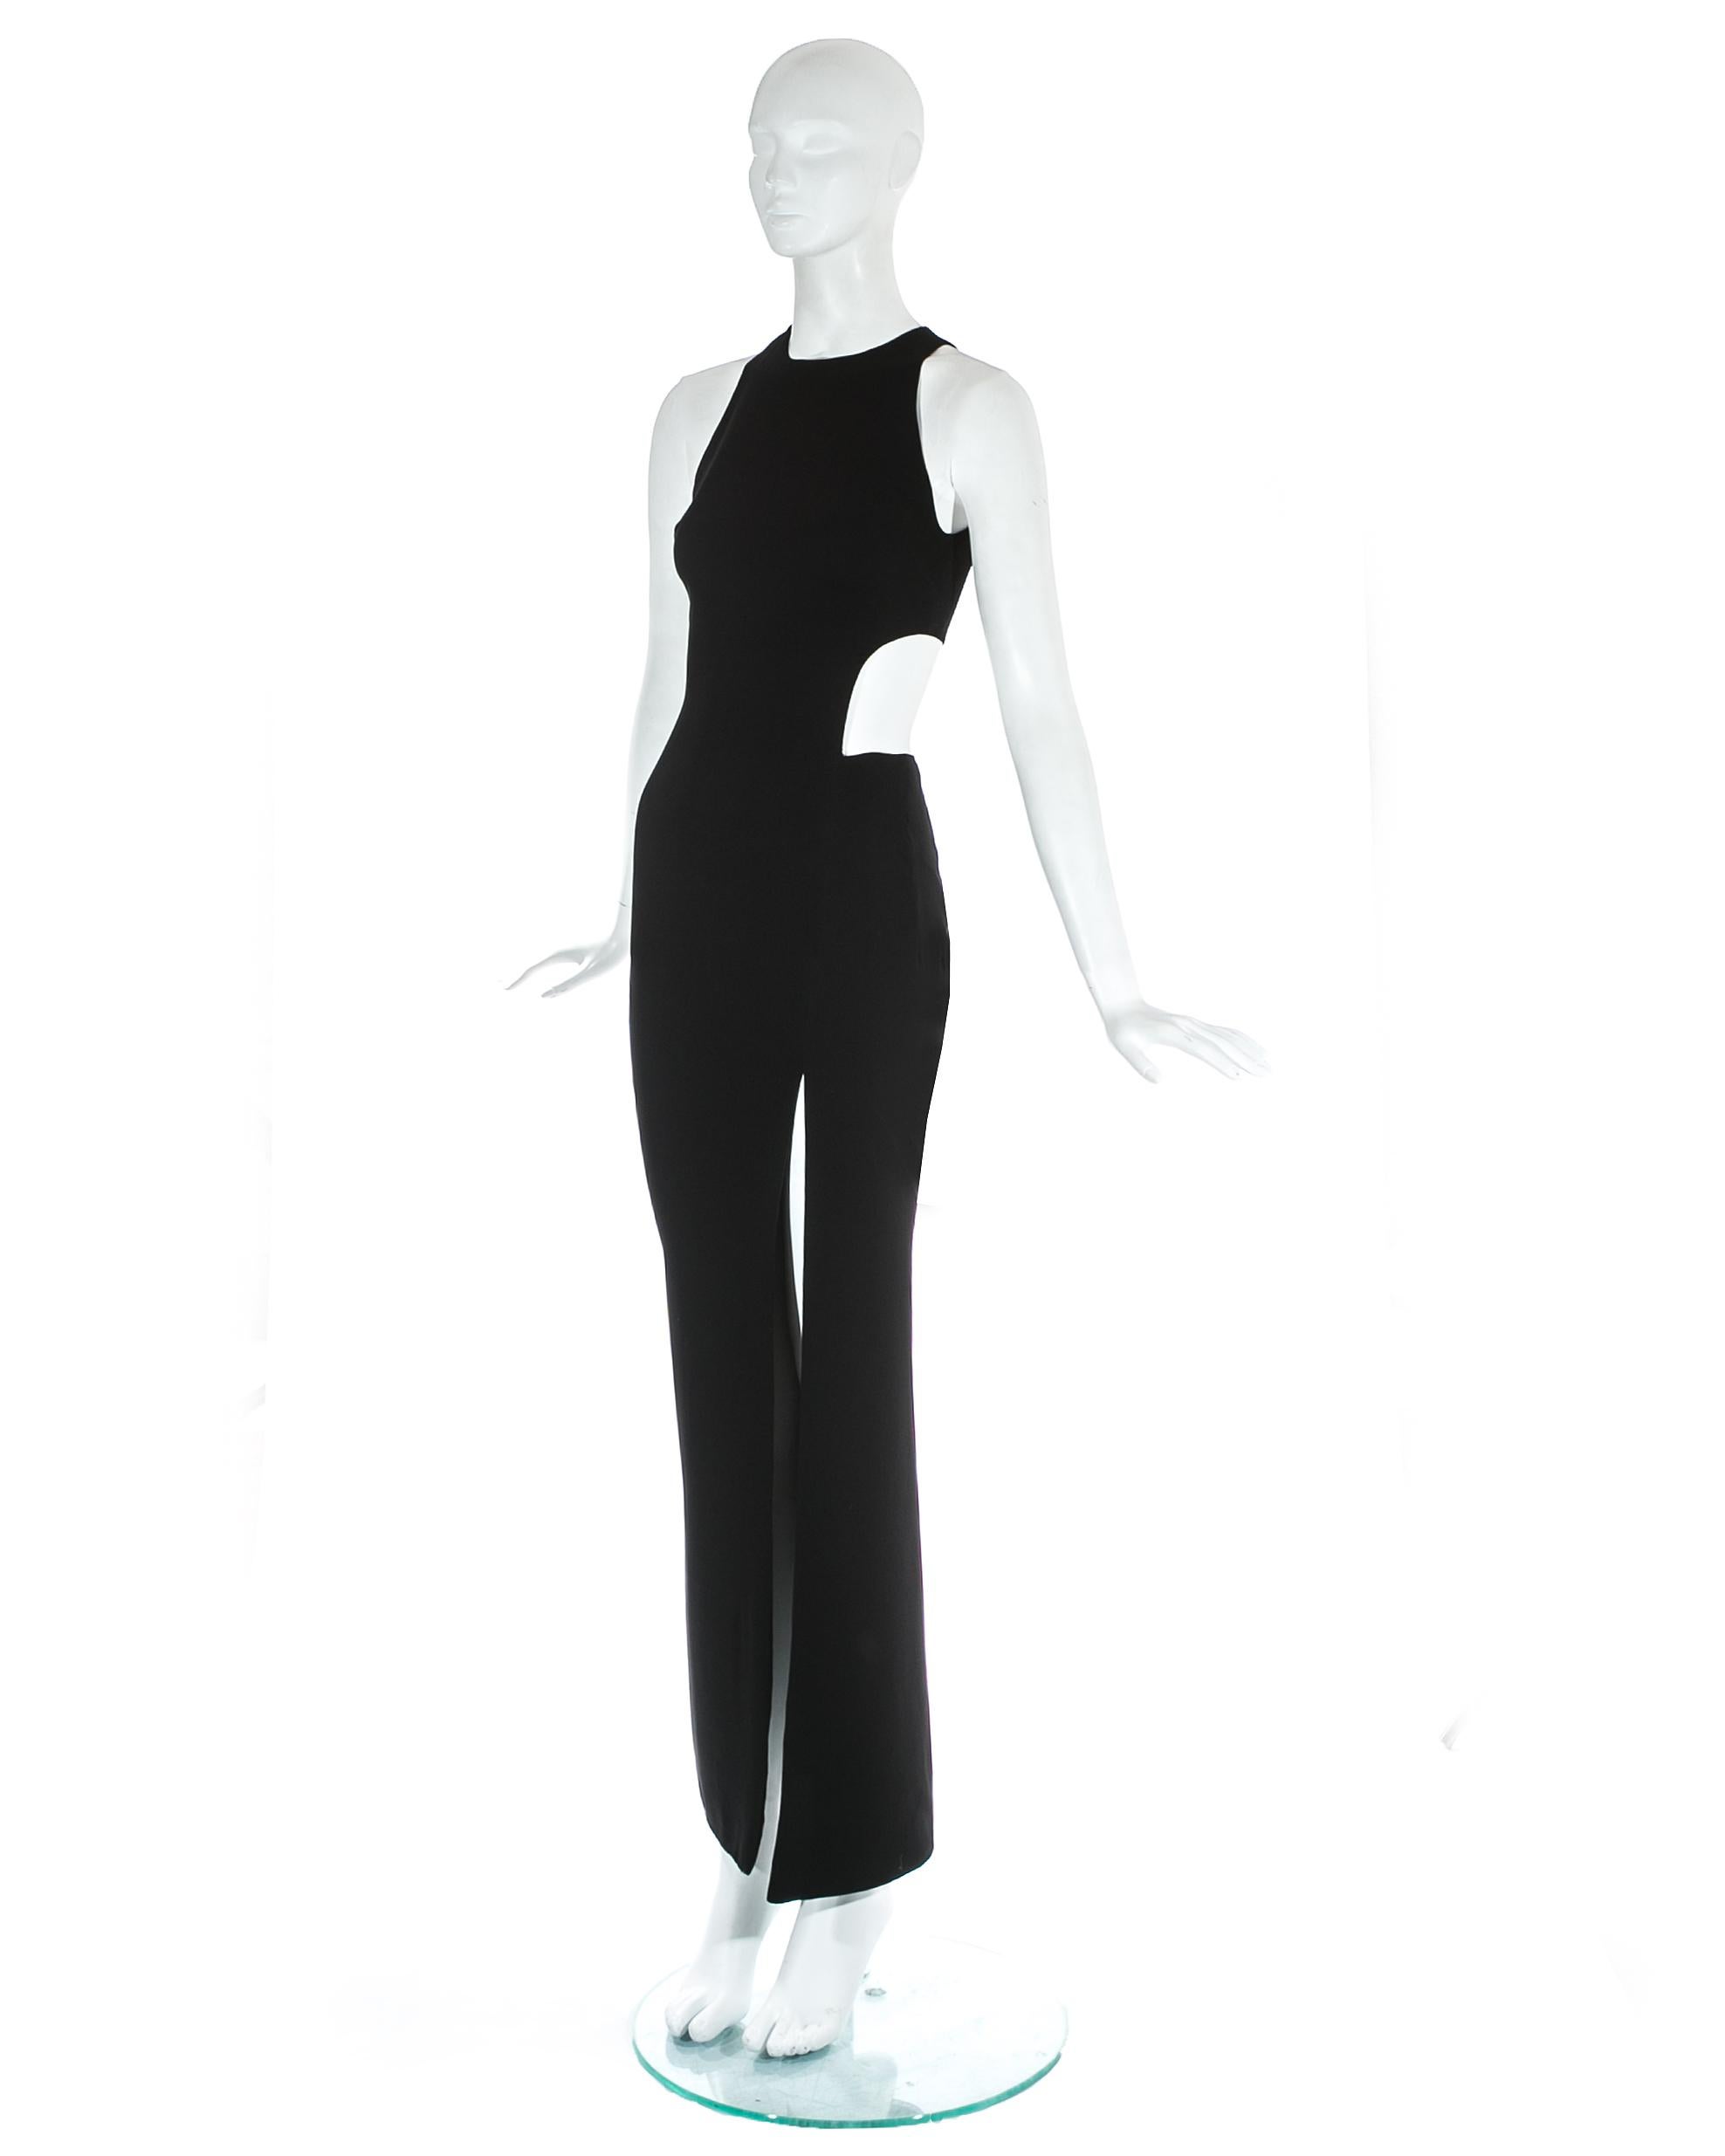 Black Gianni Versace black silk evening dress with cut out and leg slit, ss 1998 For Sale